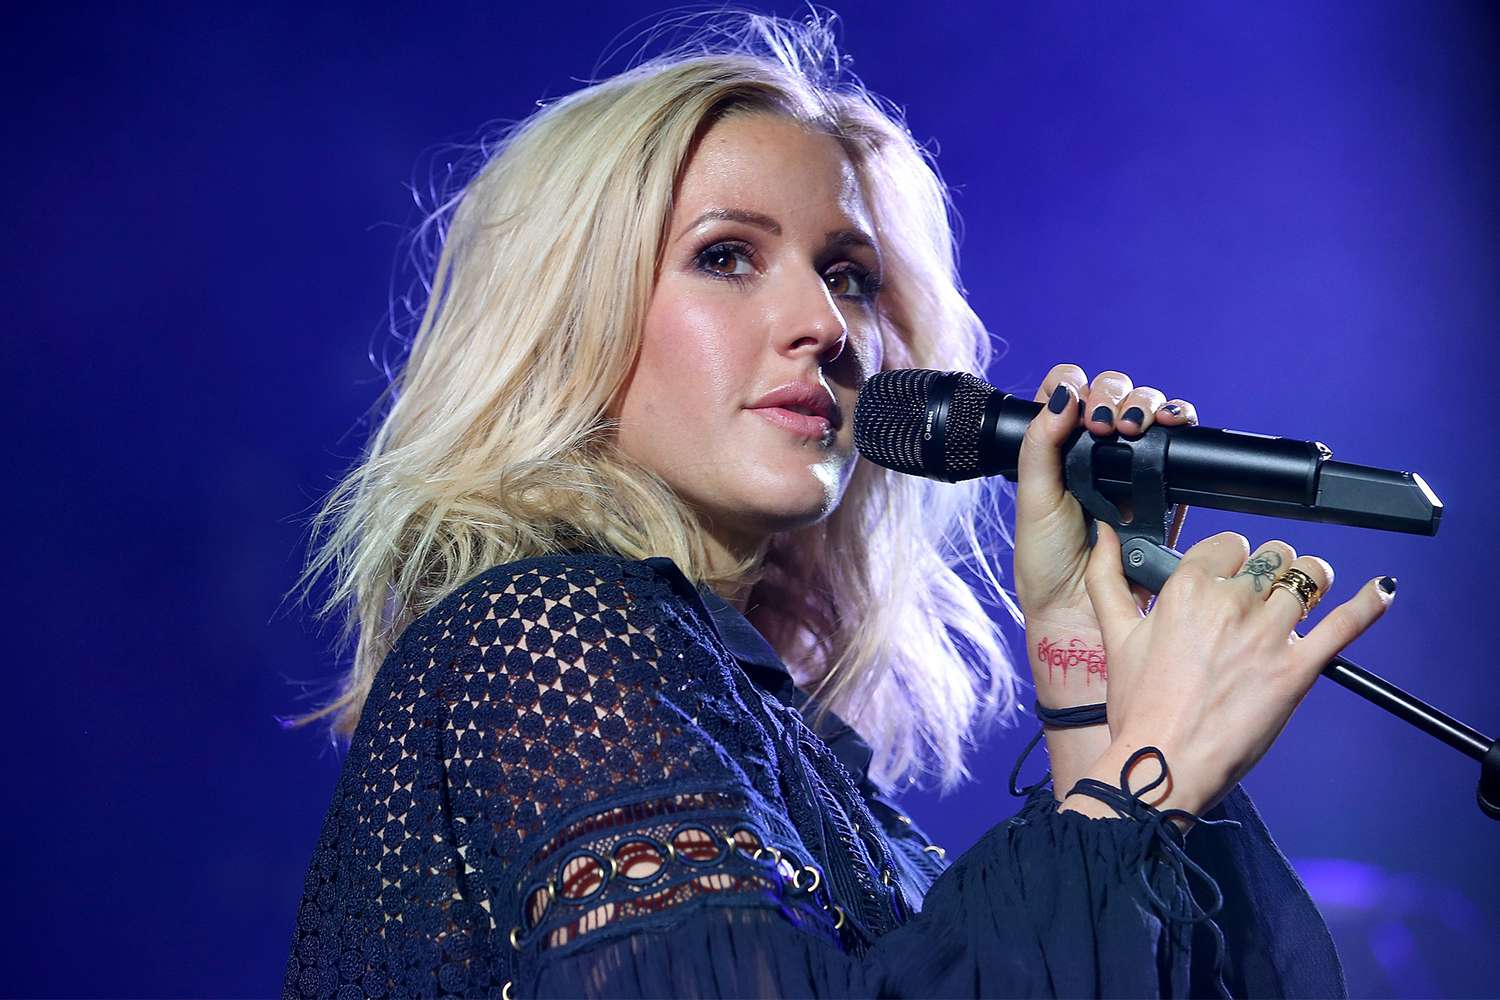 Ellie Goulding gives update after pyrotechnic appears to hit her